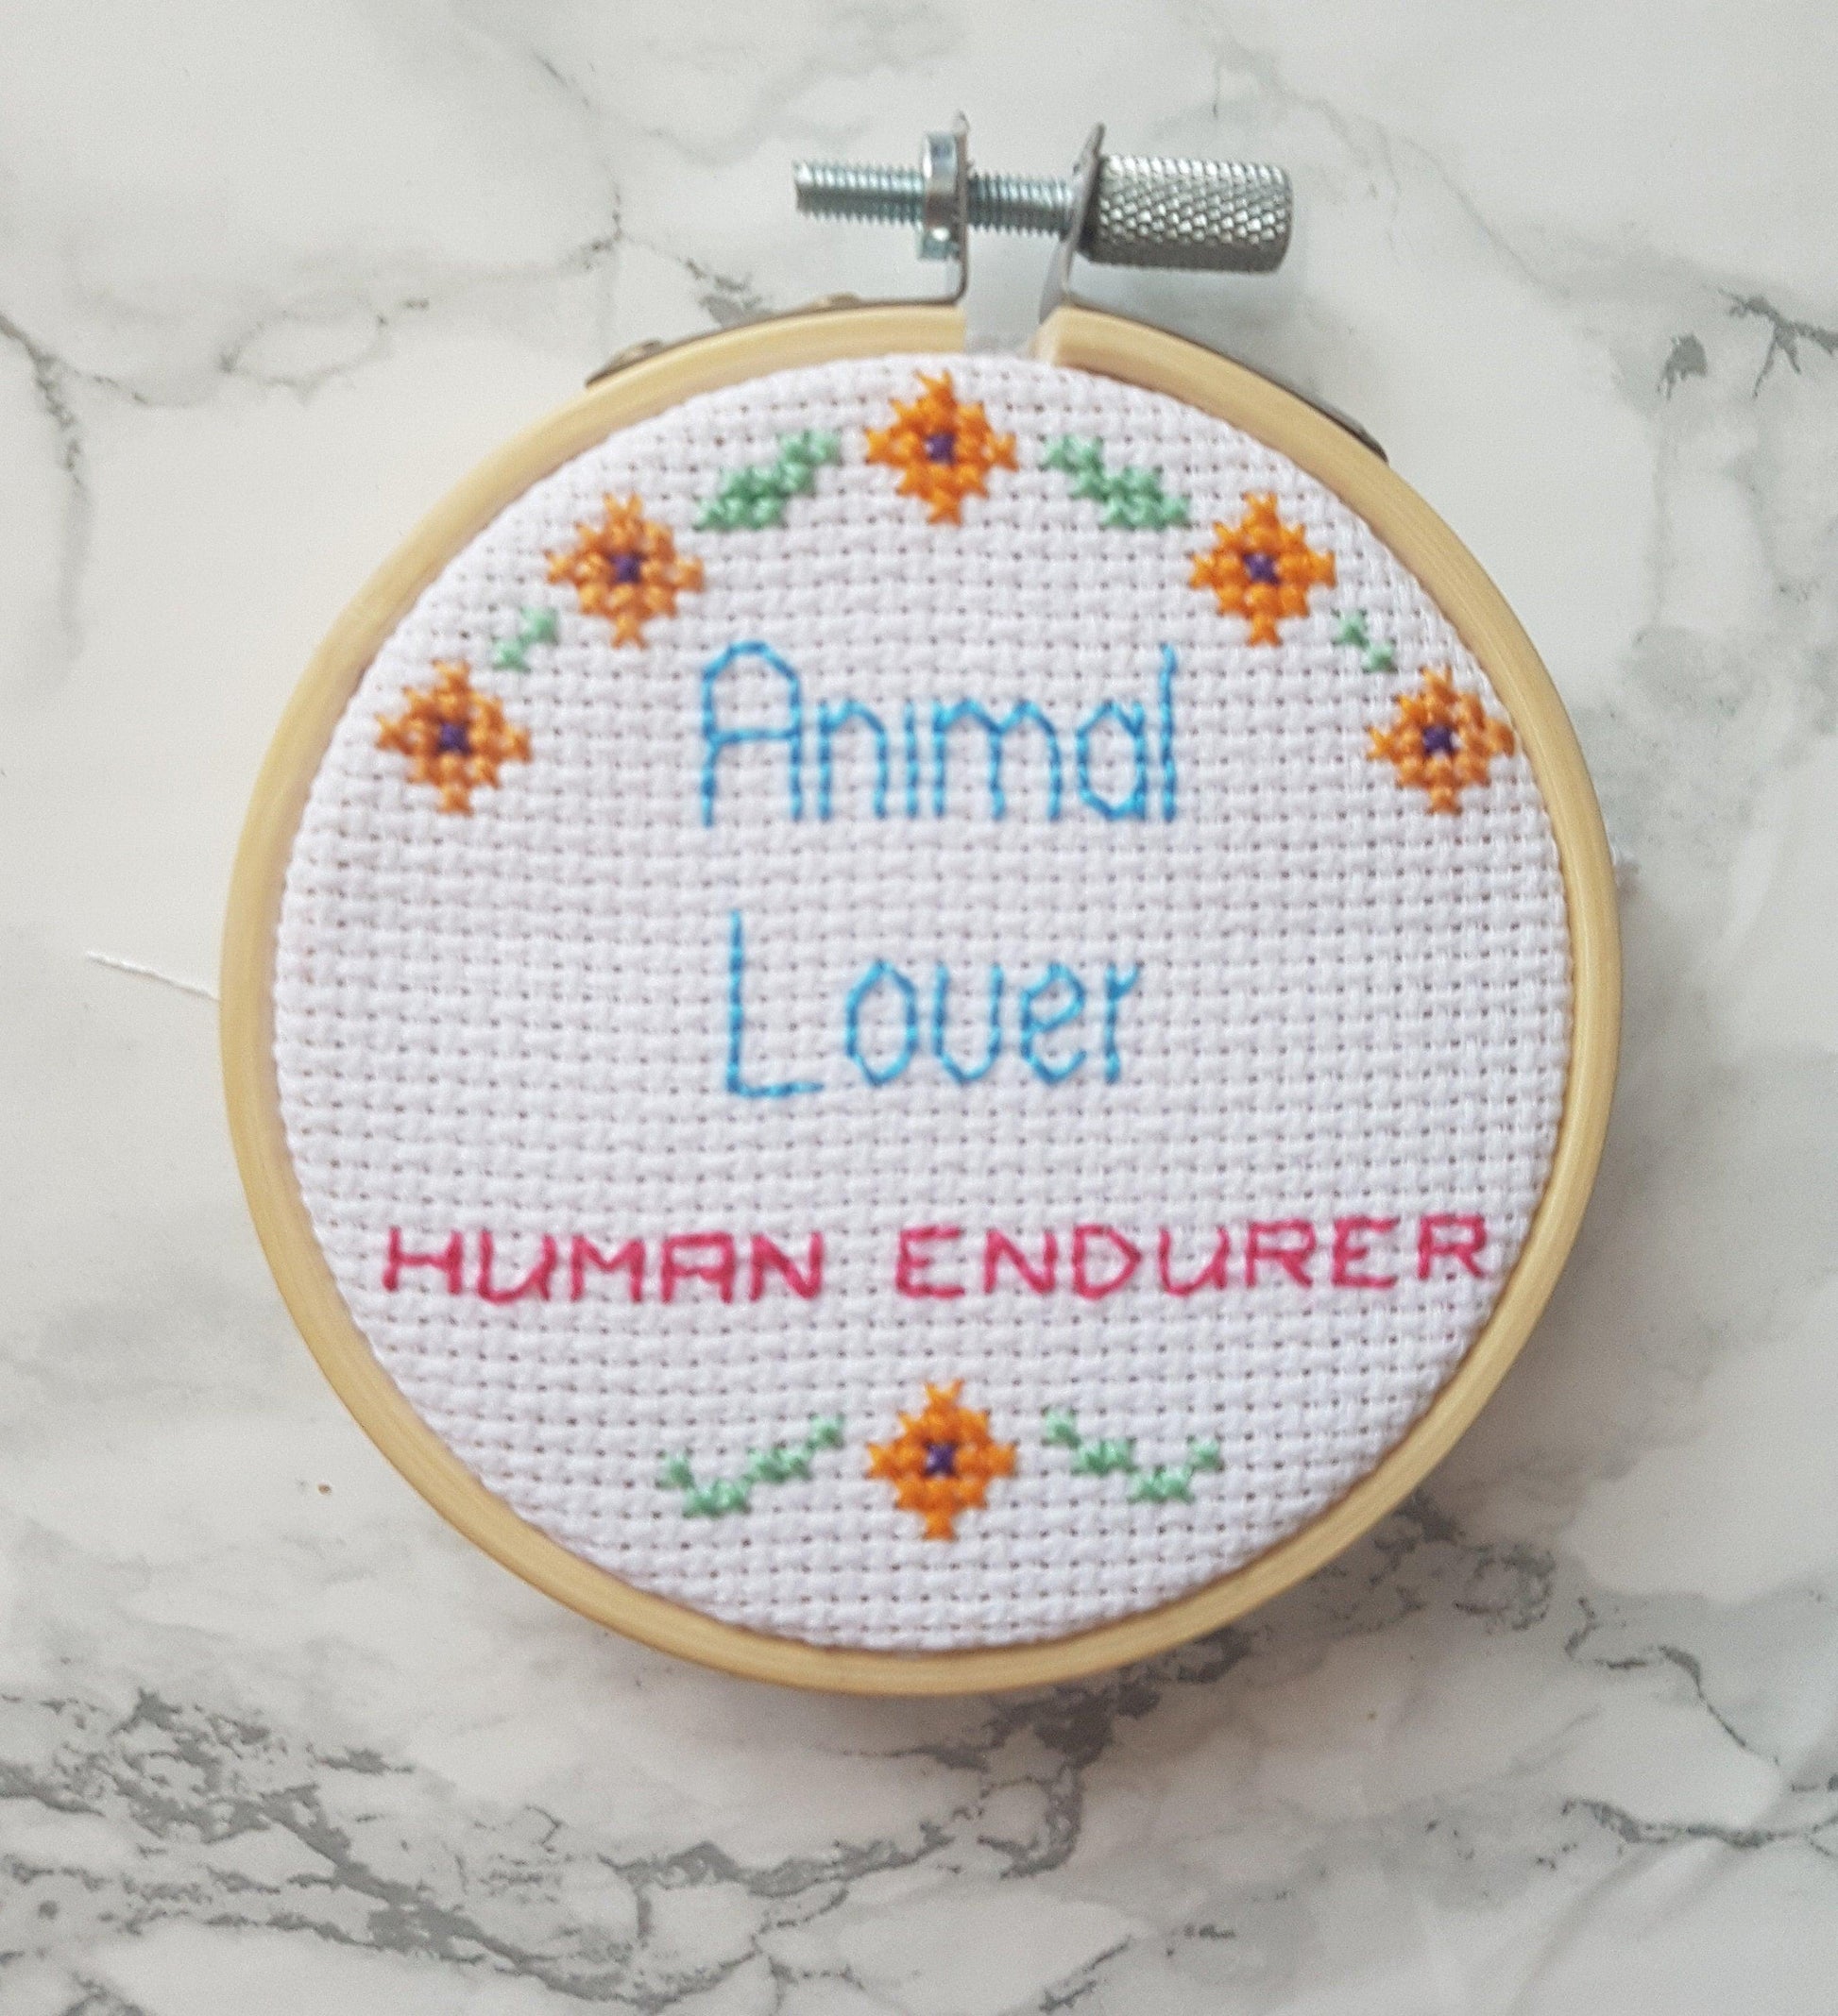 Animal lover, human endurer cross stitch quote in 3 inch embroidery hoop on white marbled background. Quote is surrounded by small flowers